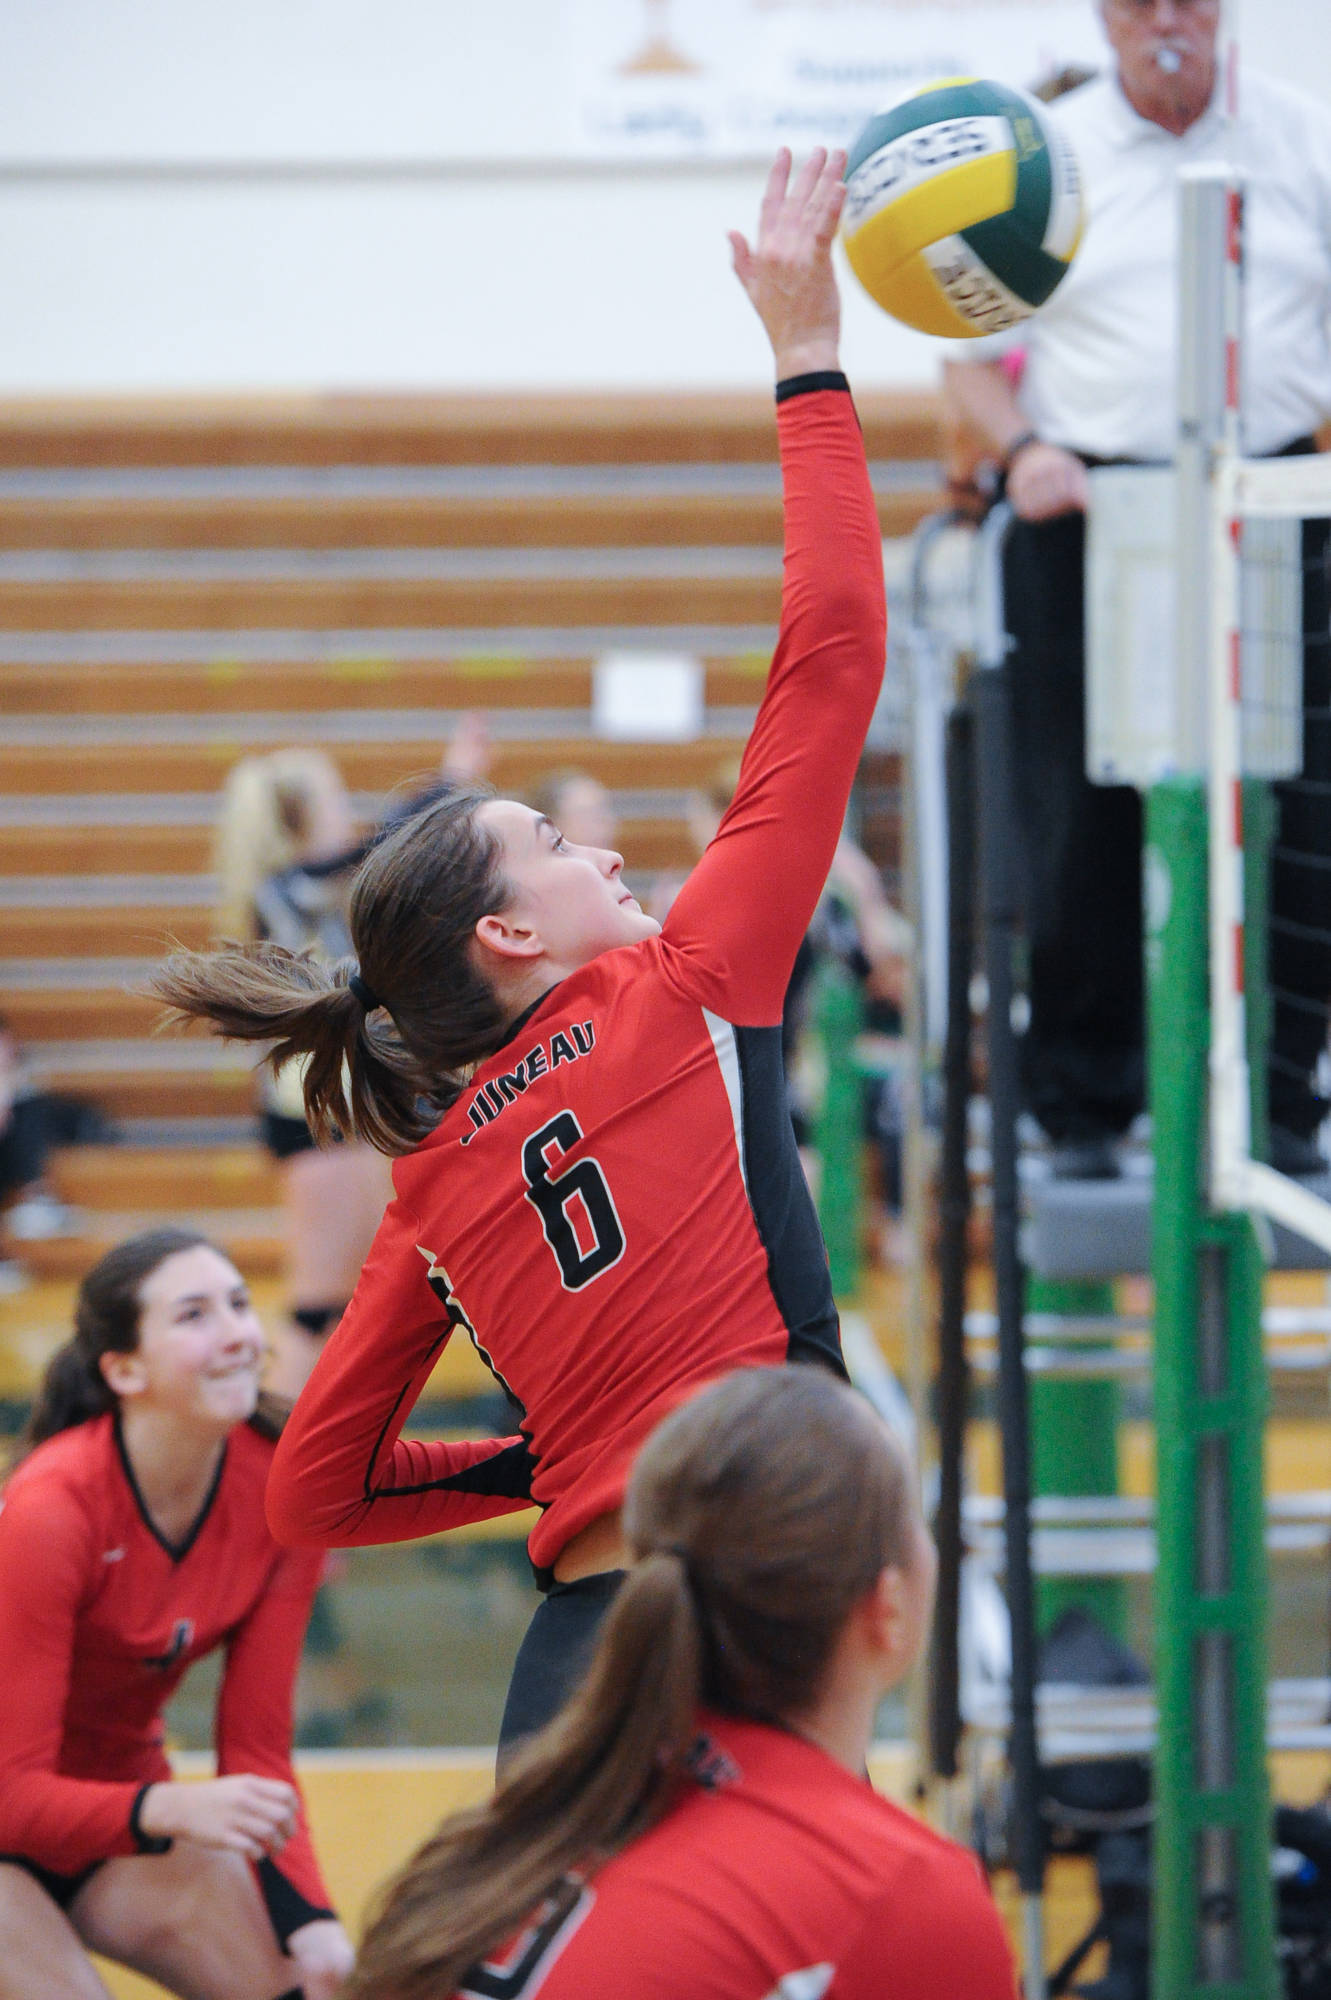 Juneau-Douglas junior middle blocker Addie Prussing taps a return against Kenai as sophomore outside hitter Jenae Pusich looks on during the the Dimond-Service Tournament at Service High School in Anchorage on Friday. JDHS lost 25-19 and 25-22. (Michael Dinneen | For the Juneau Empire)